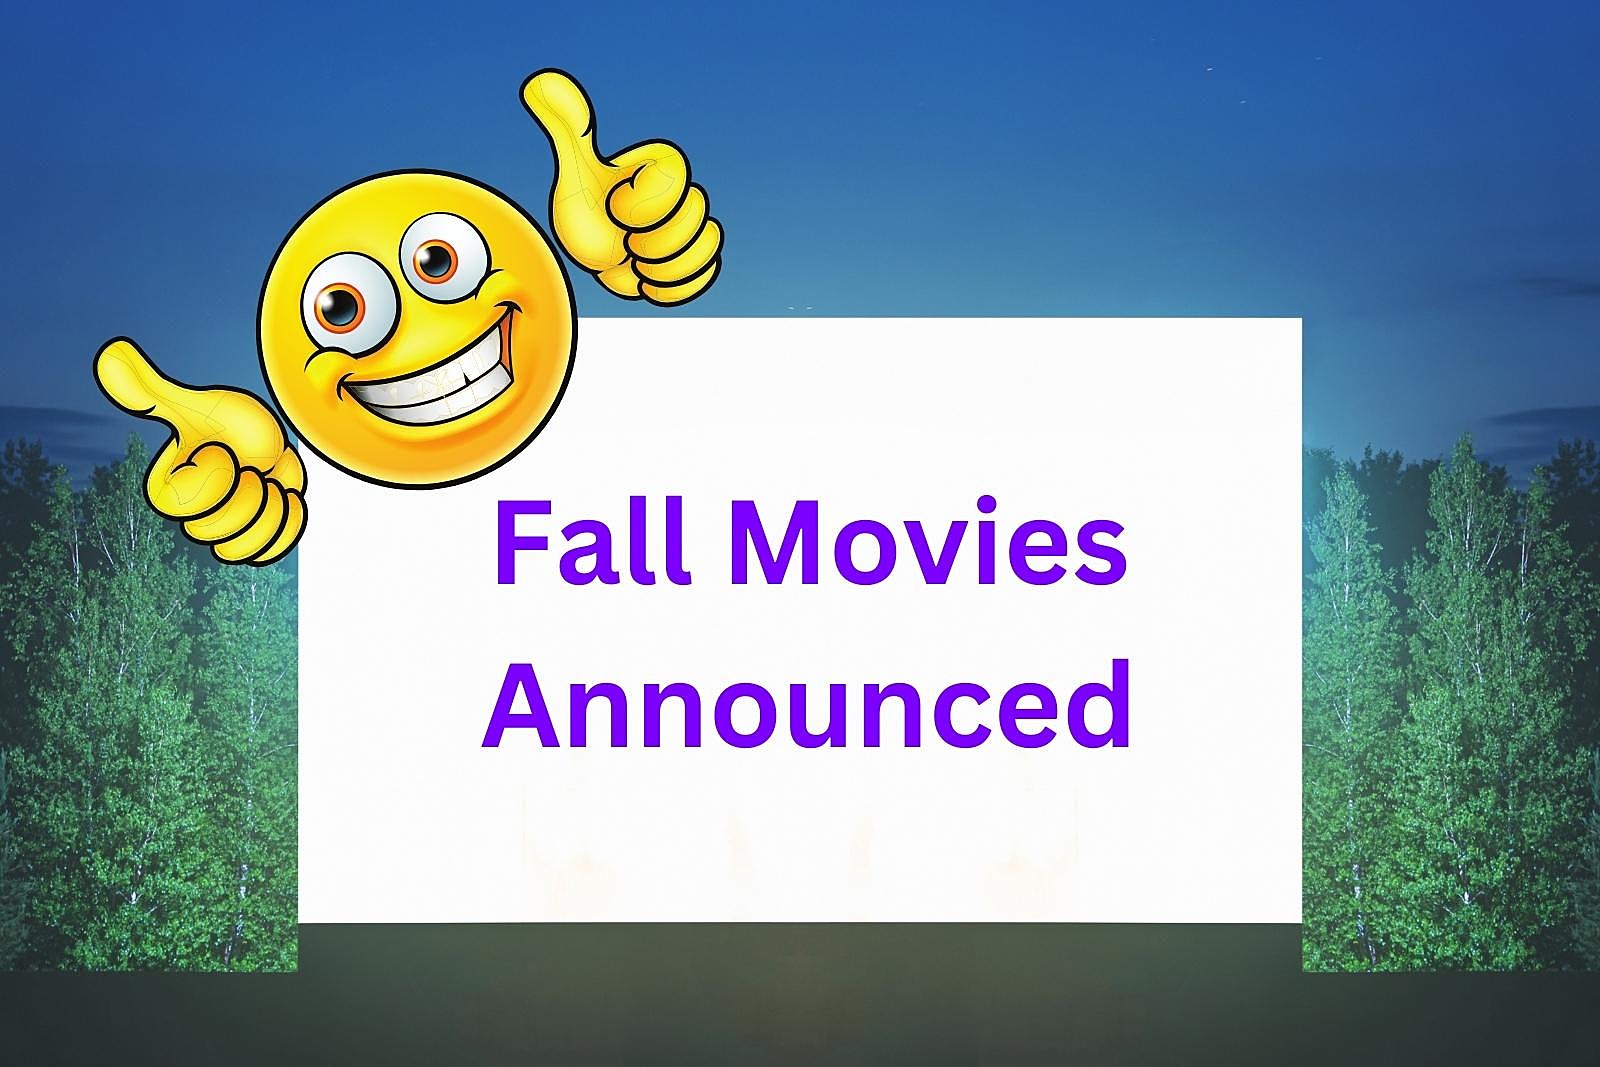 Enjoy Free Movies in The Park at Spring Lake Park This Fall picture picture